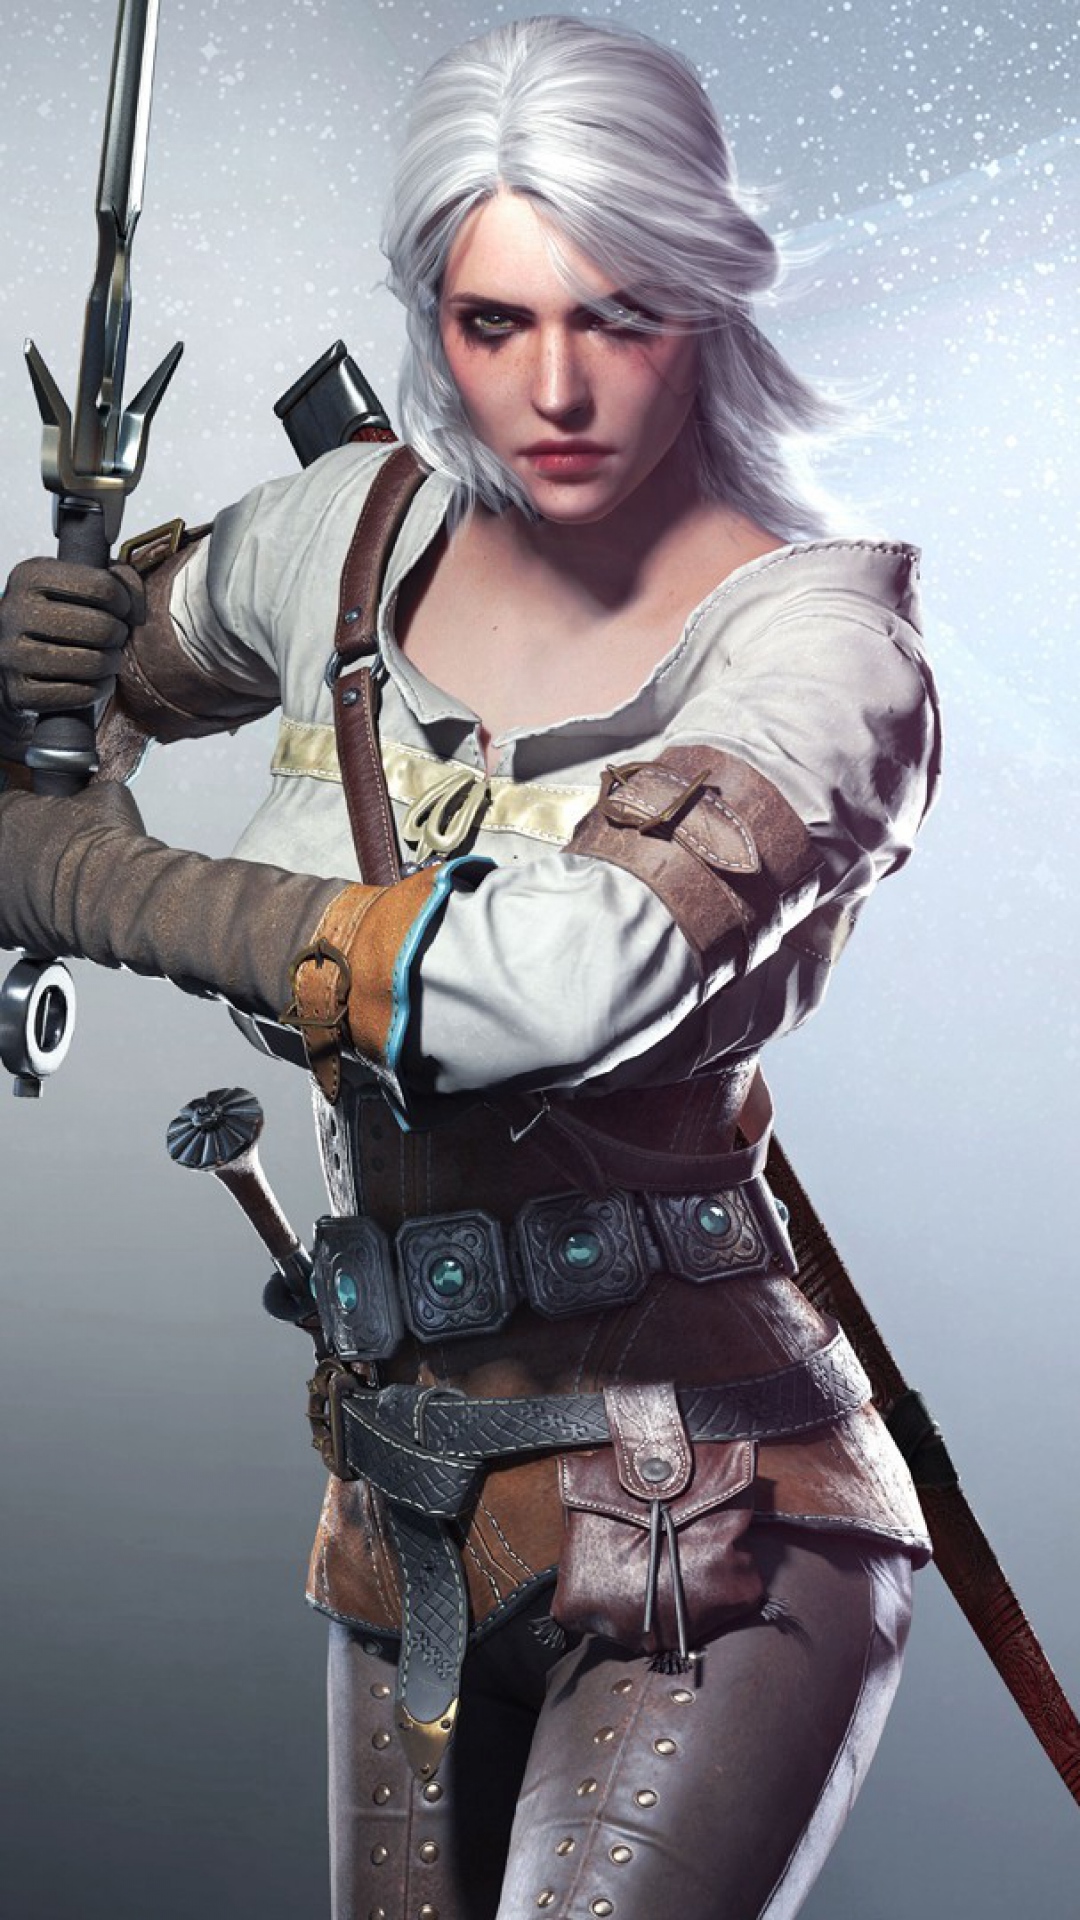 Video Game Iphone Wallpapers The Witcher 3 Wild Hunt - Witcher Video Game Ciri - HD Wallpaper 